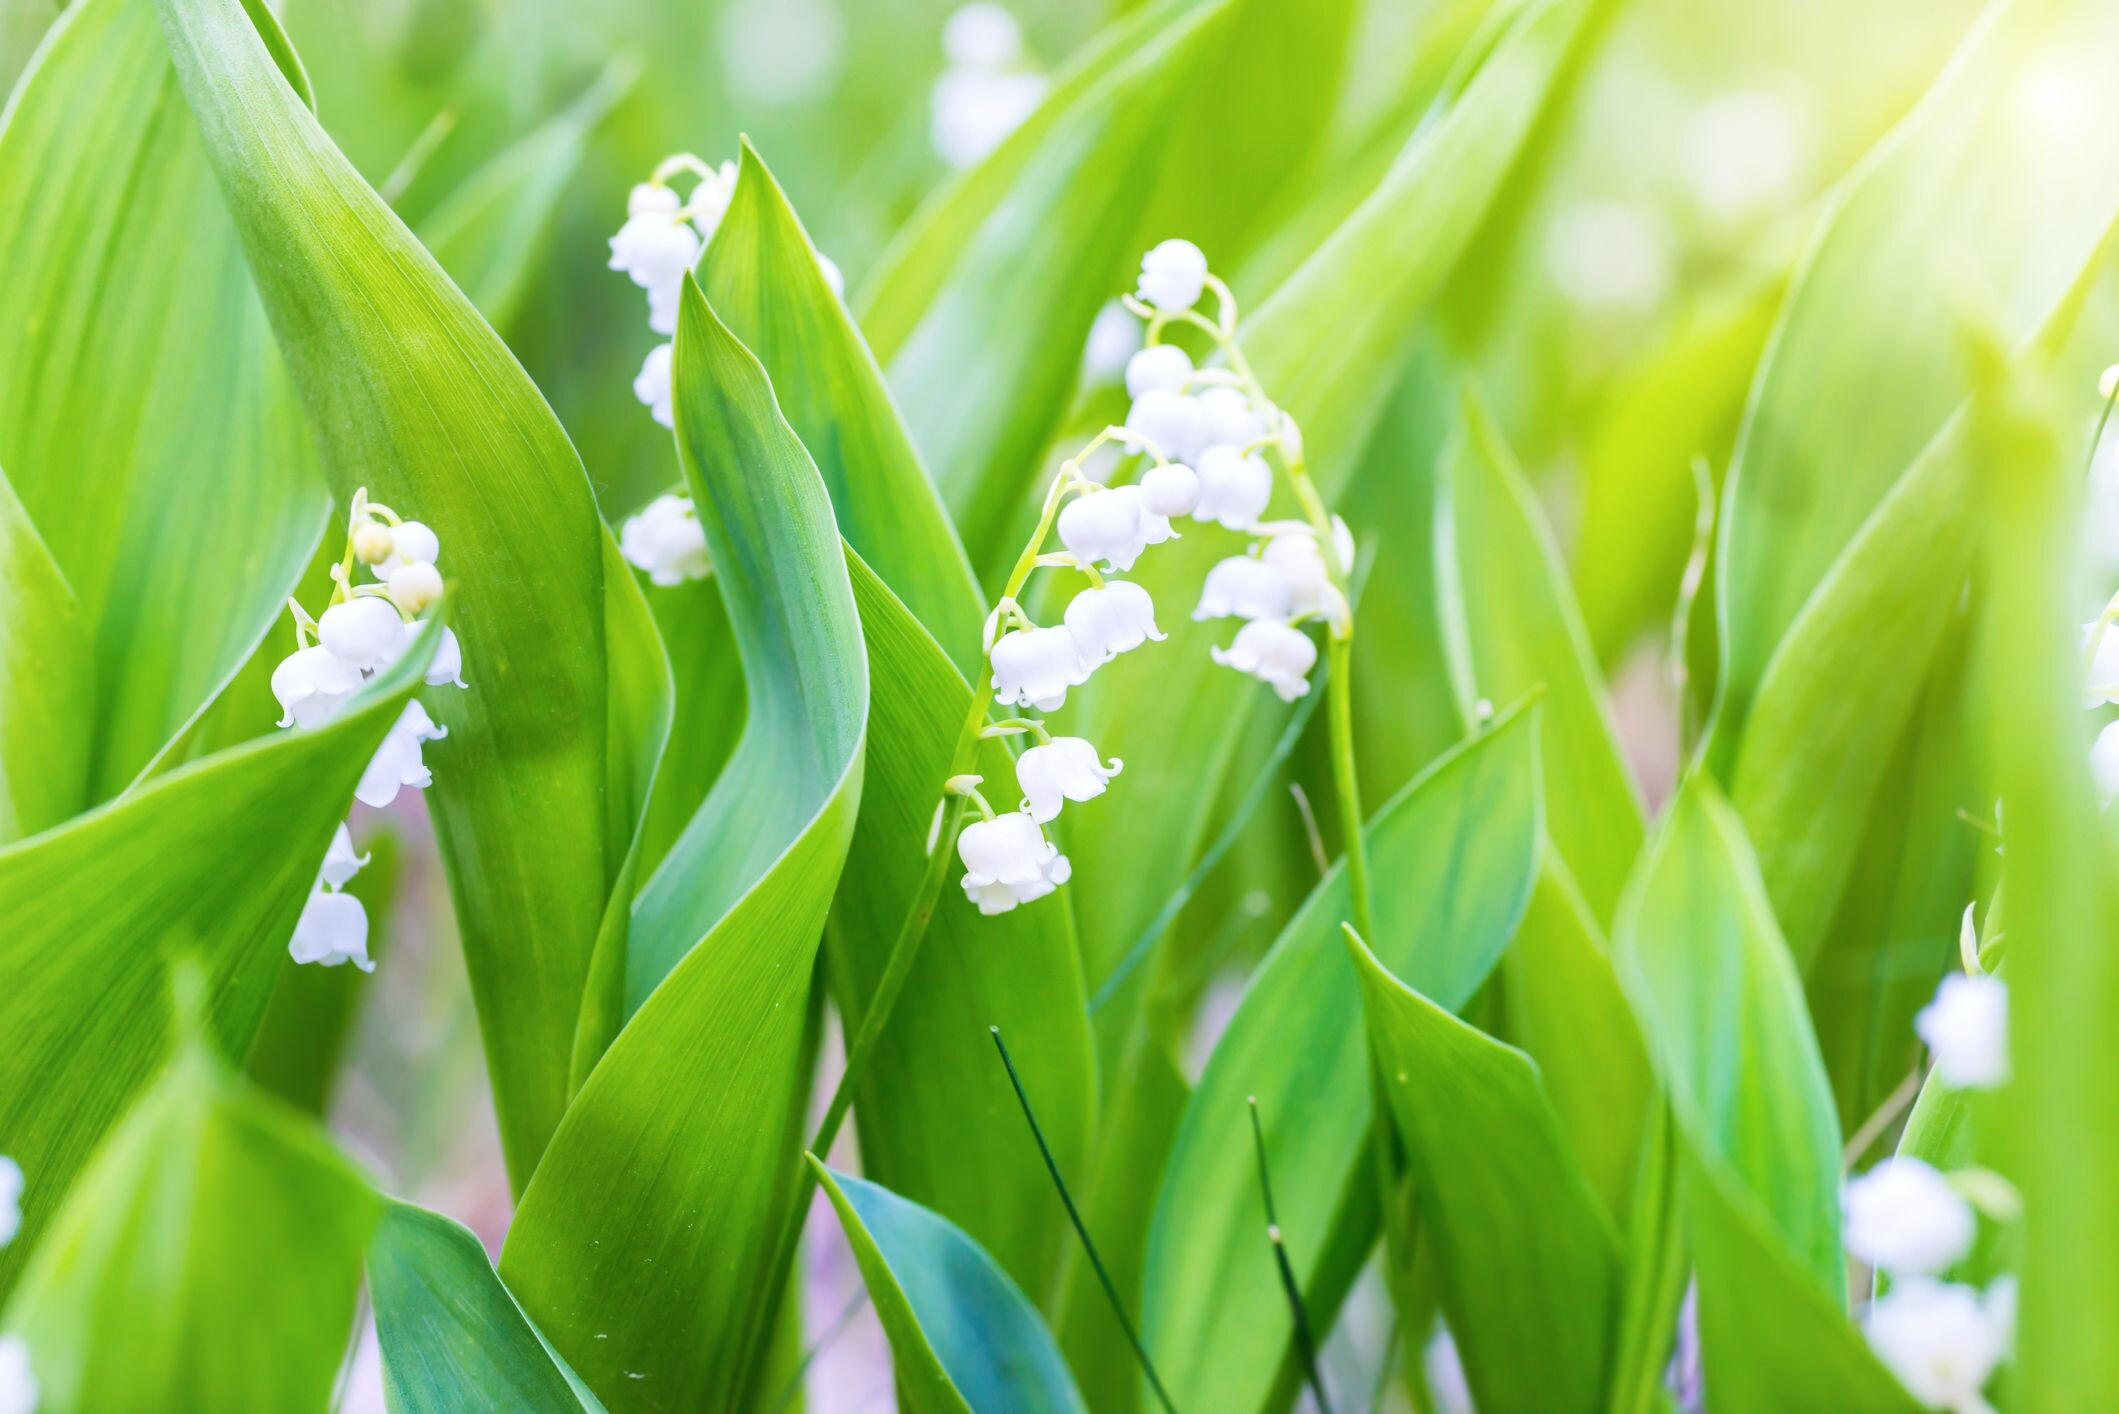 Lily of the Valley: This plant typically blooms for a period of about four weeks during mid-spring to early summer—the exact bloom period depends on your hardiness zone. 2120x1420 HD Background.